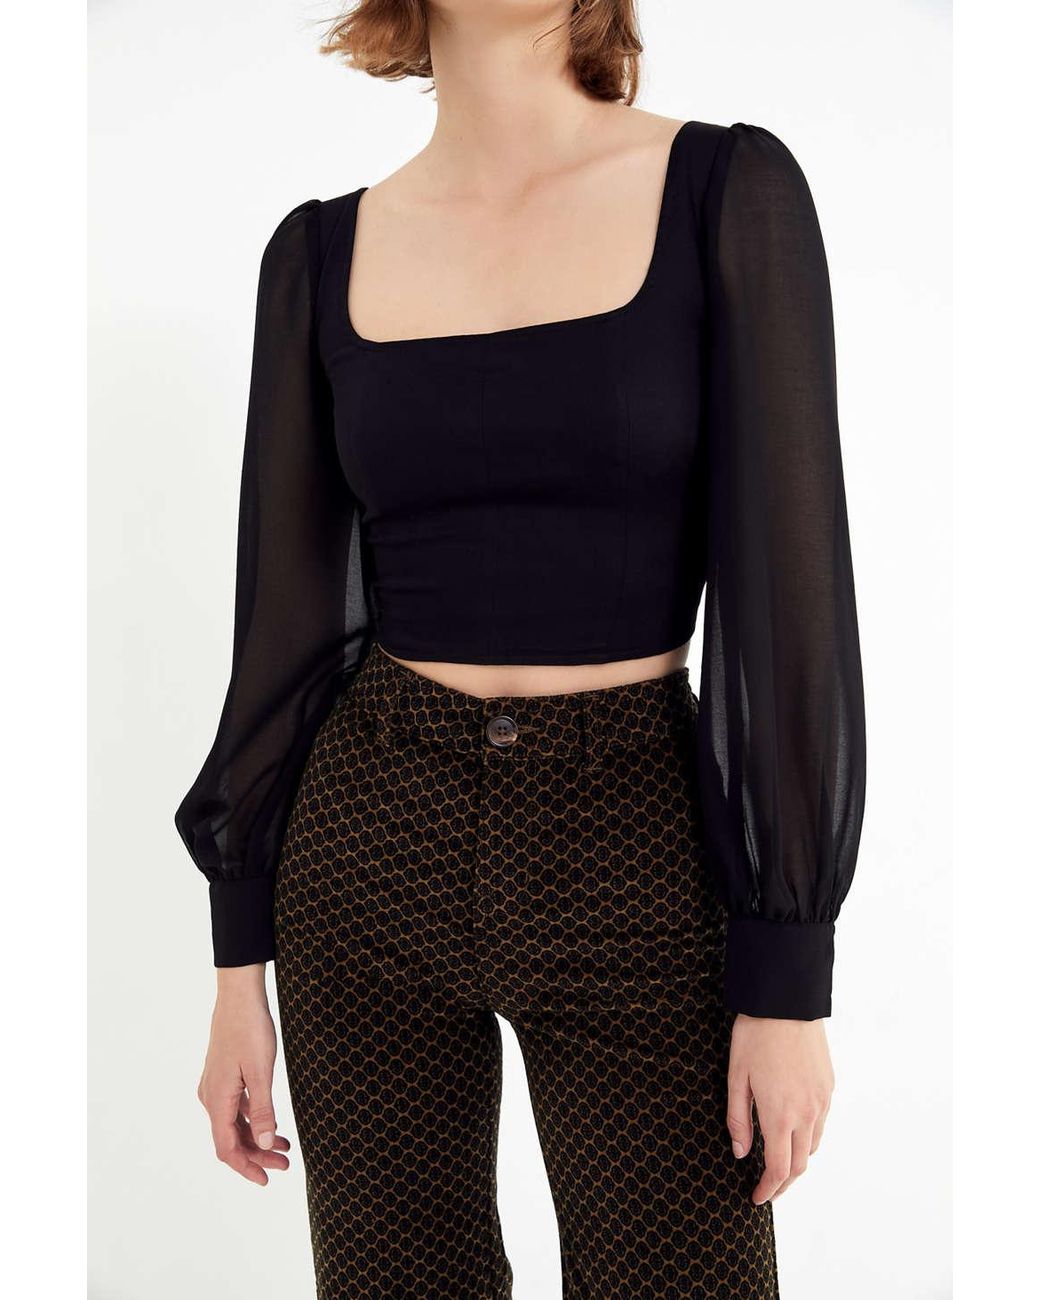 Urban Outfitters Uo Lena Sheer Sleeve Square Neck Blouse in Black